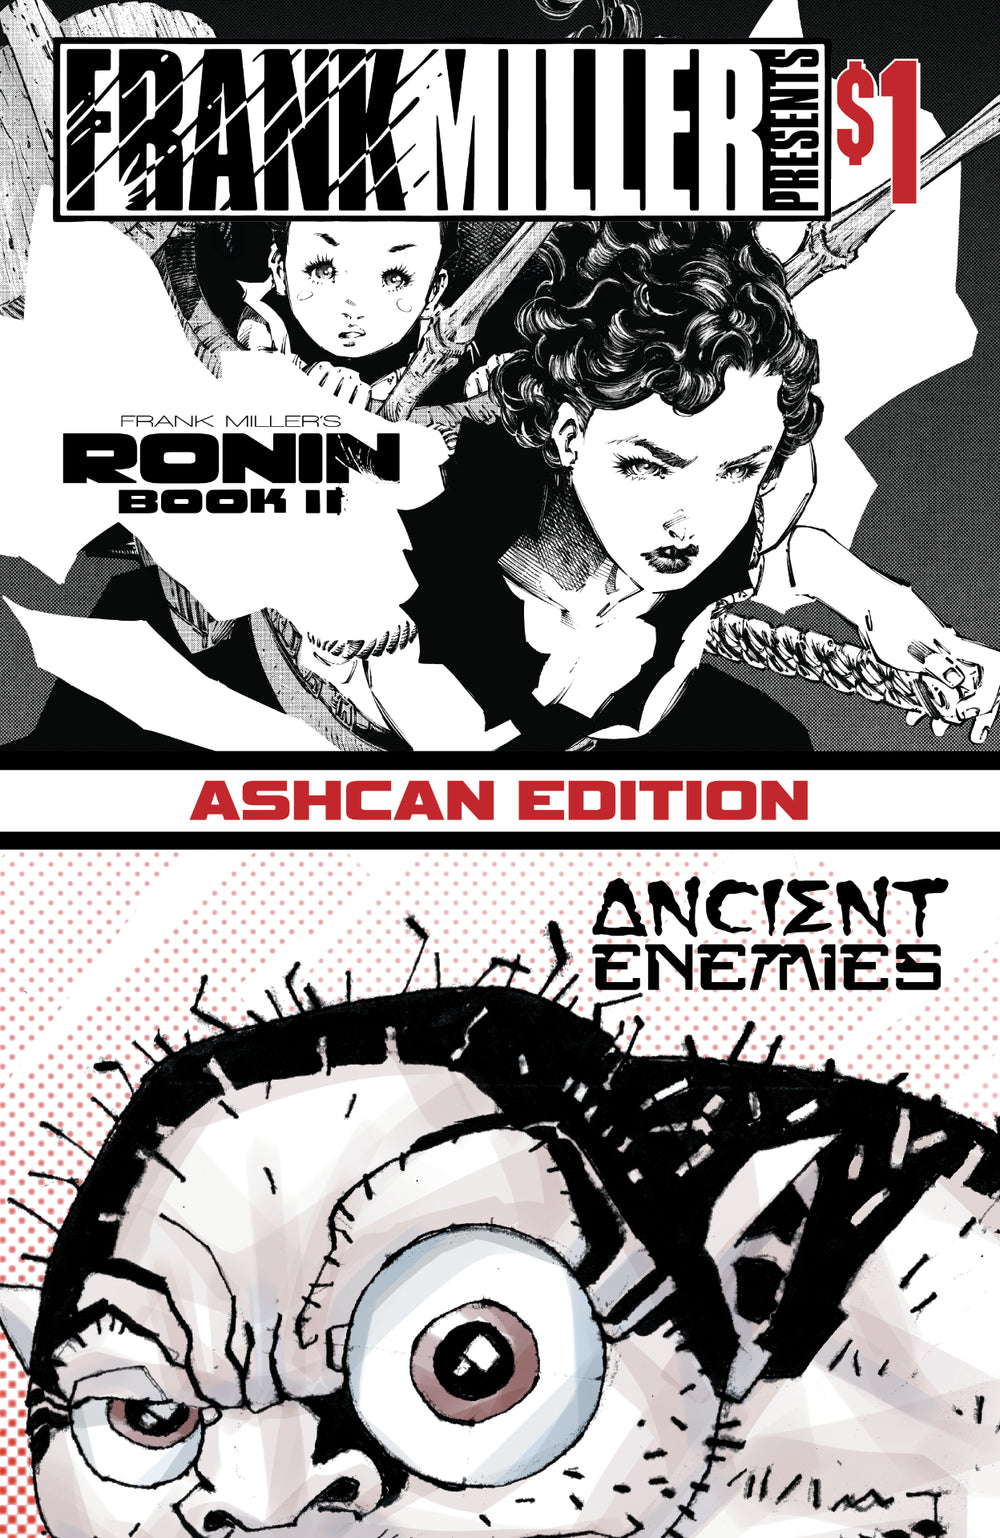 Frank Miller's Ronin Book Two - Ashcan Edition